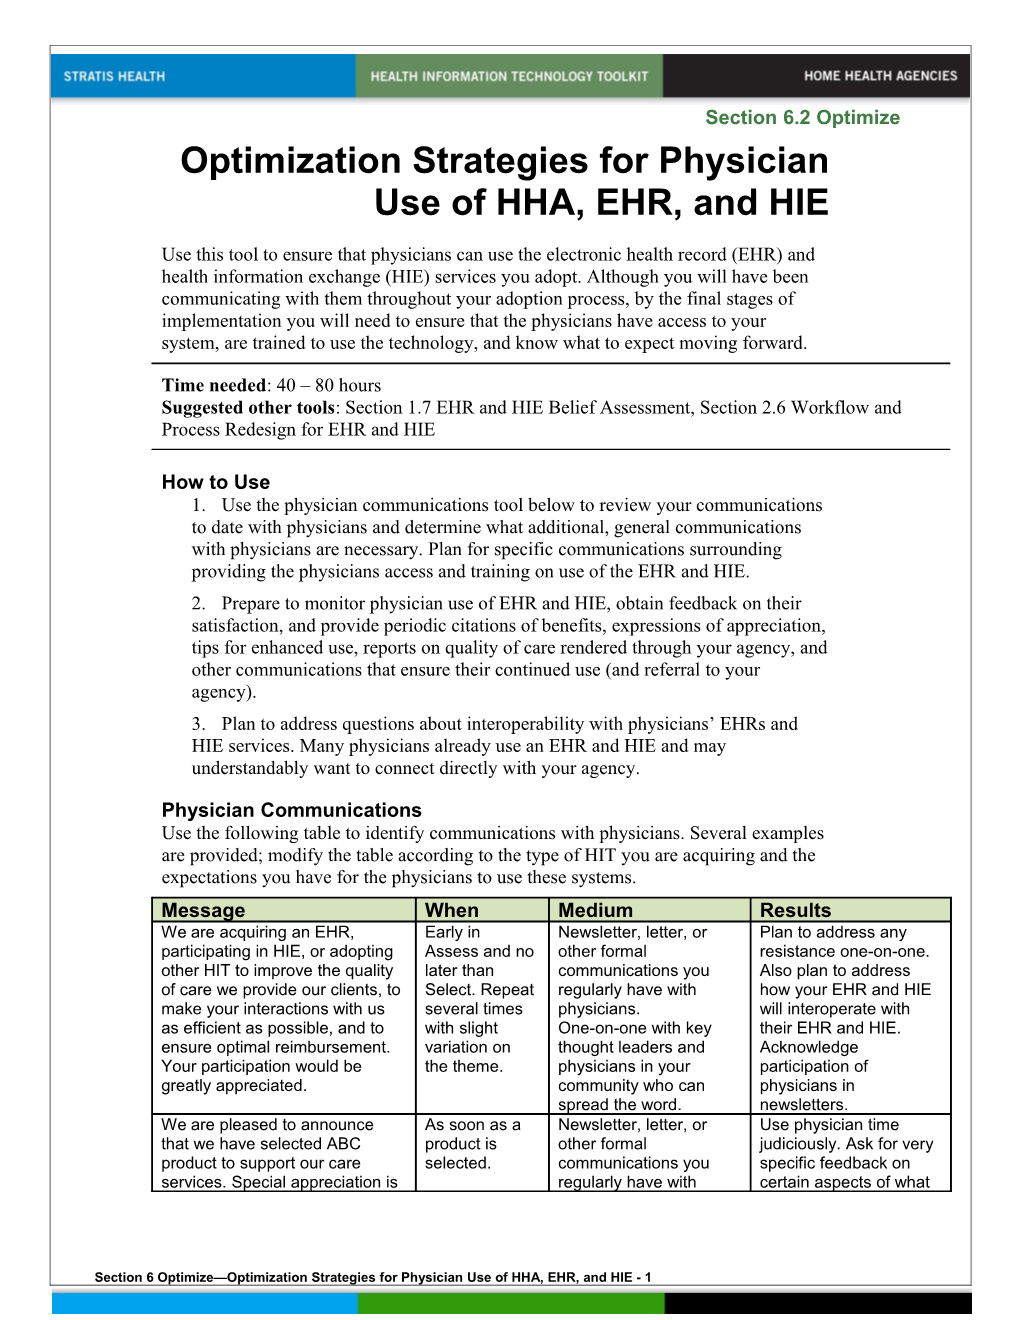 6. Optimization Strategies for Physician Use of HHA, EHR, and HIE